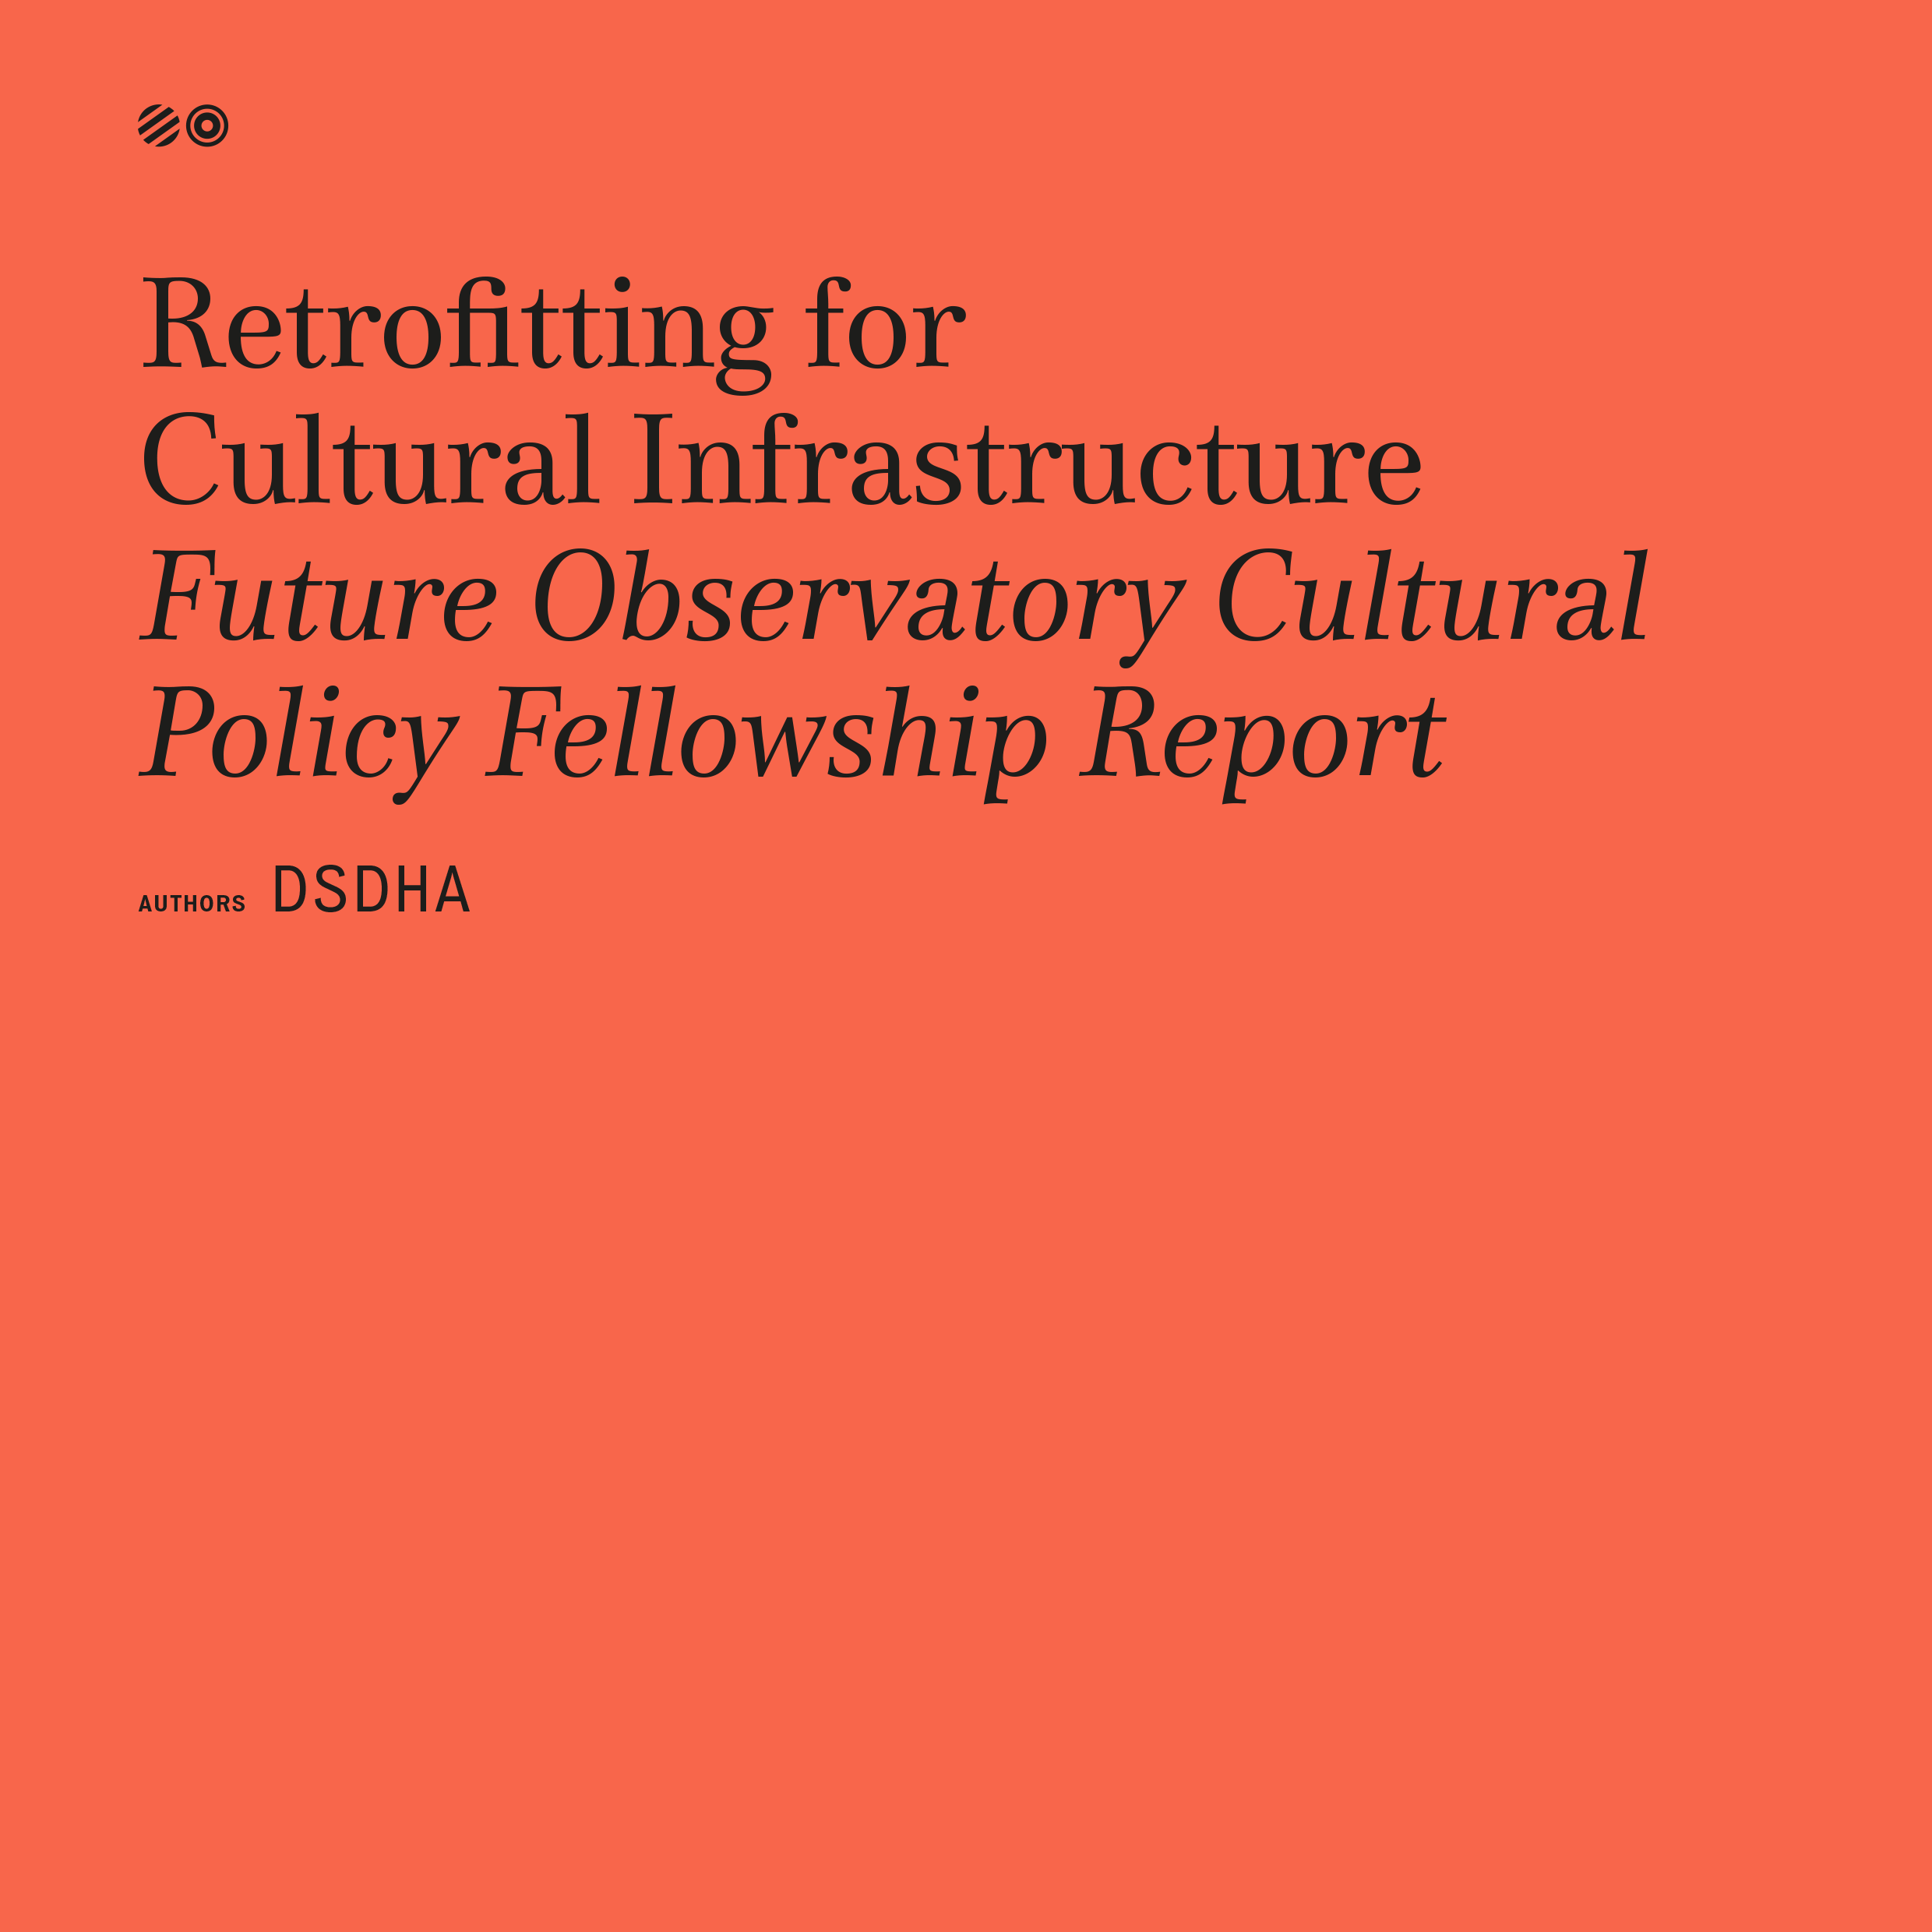 future-observatory-cultural-policy-report_dsdha-1.png